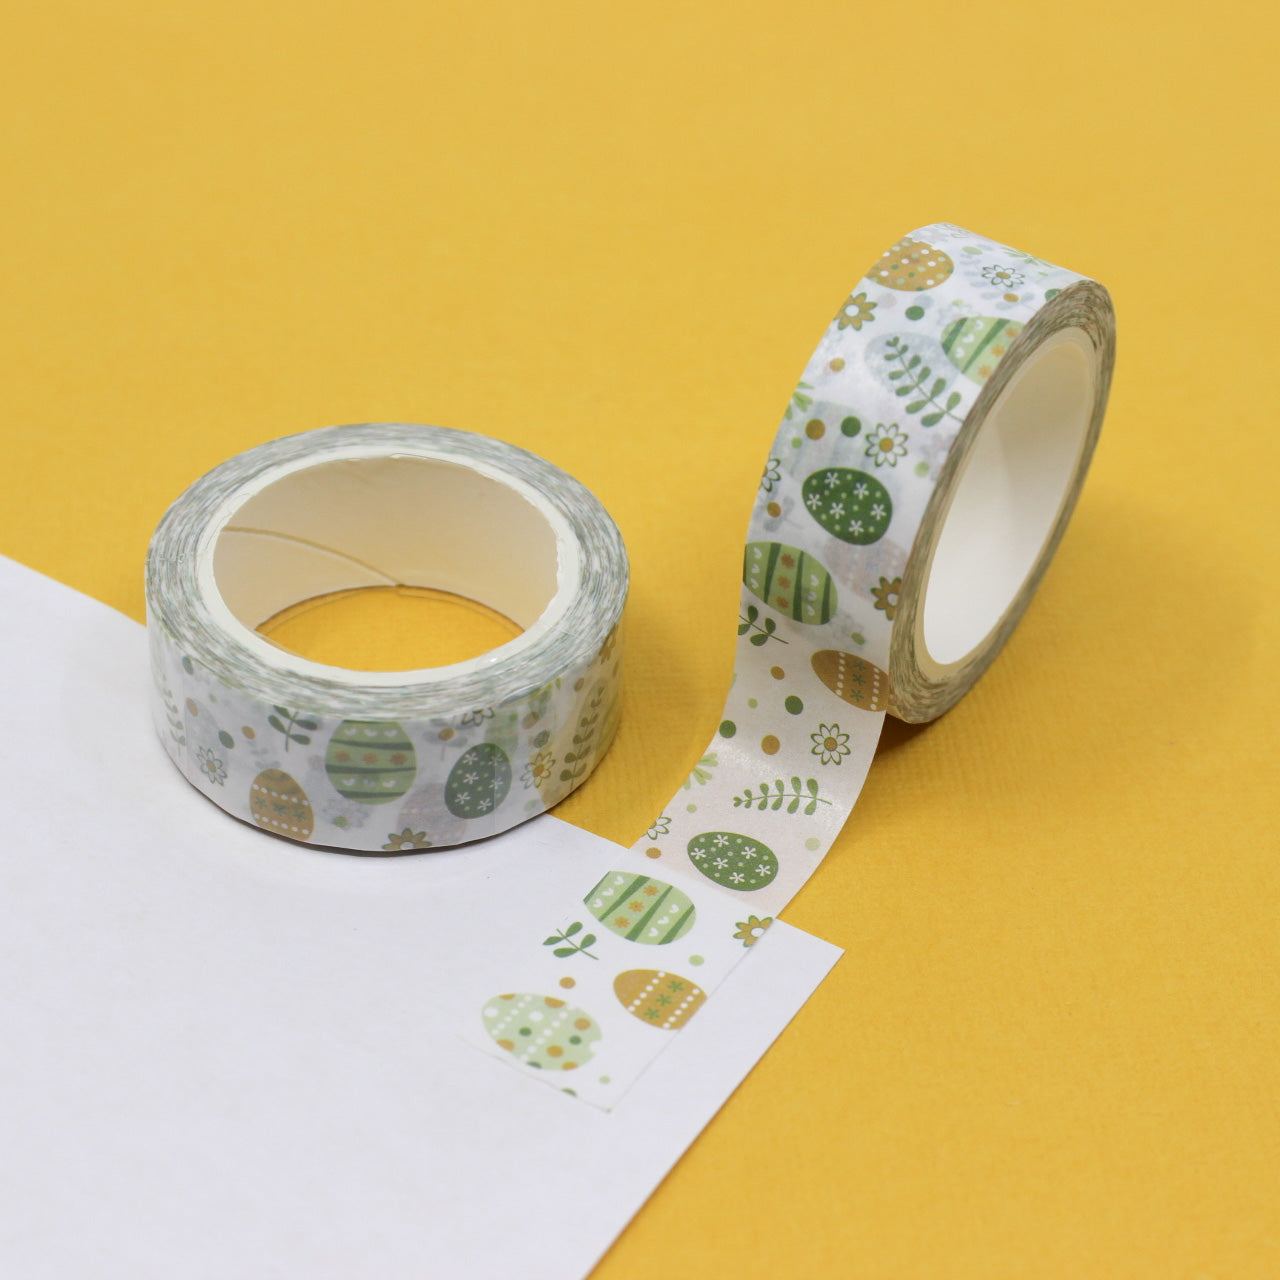 This delightful washi tape features a charming pattern of green and yellow Easter eggs, perfect for adding a festive touch to your Easter crafts and decorations. This tape is sold at BBB Supplies Craft Shop.